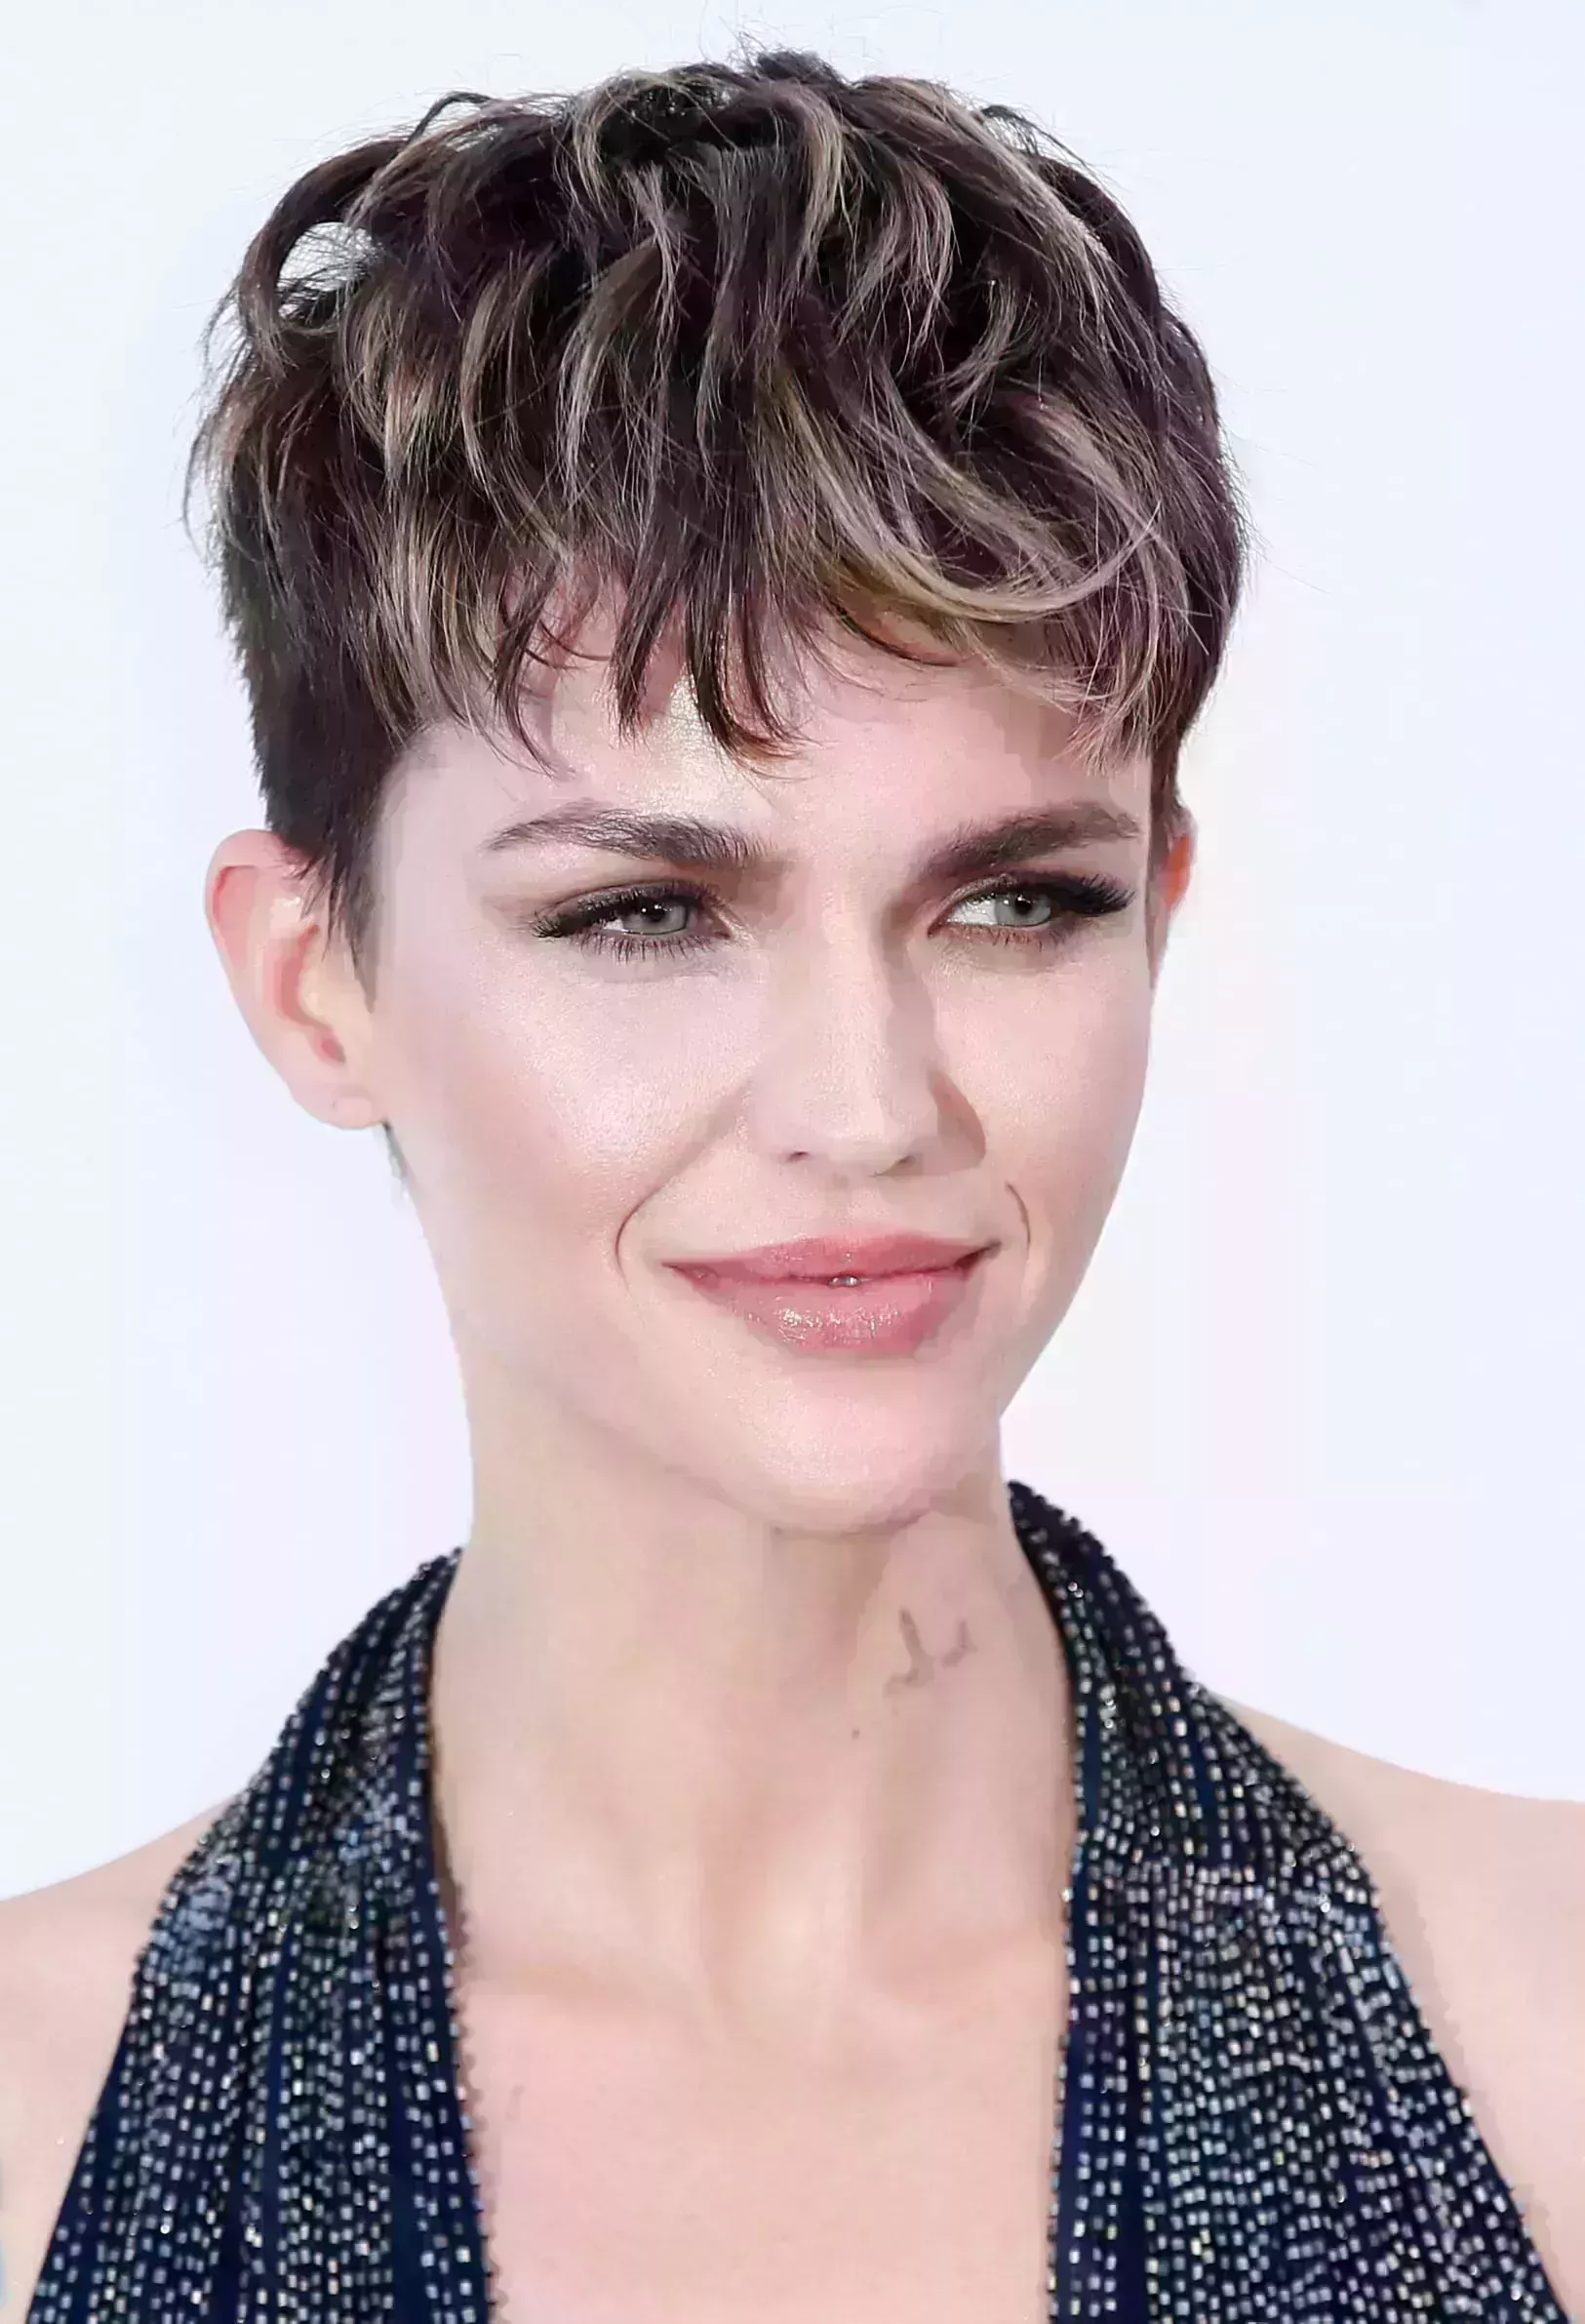 Ruby Rose’s Undercut Crop with Highlights